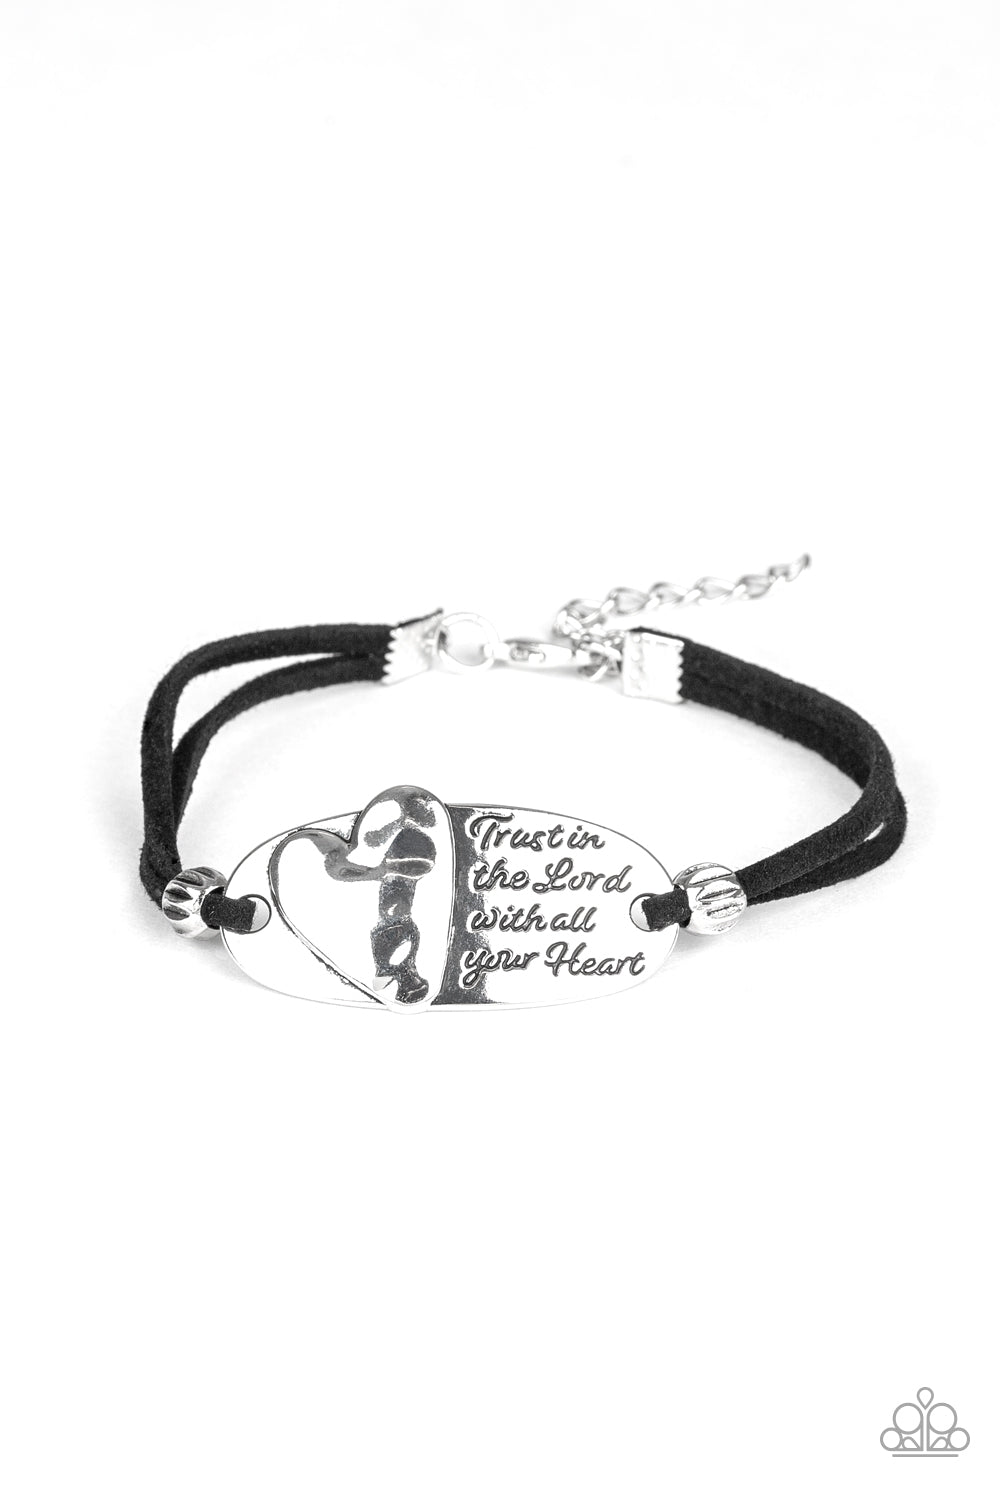 Paparazz Accessories - www.5dollarstylemaven.com - A Full Heart - Silver - Paparazzi Accessories - 